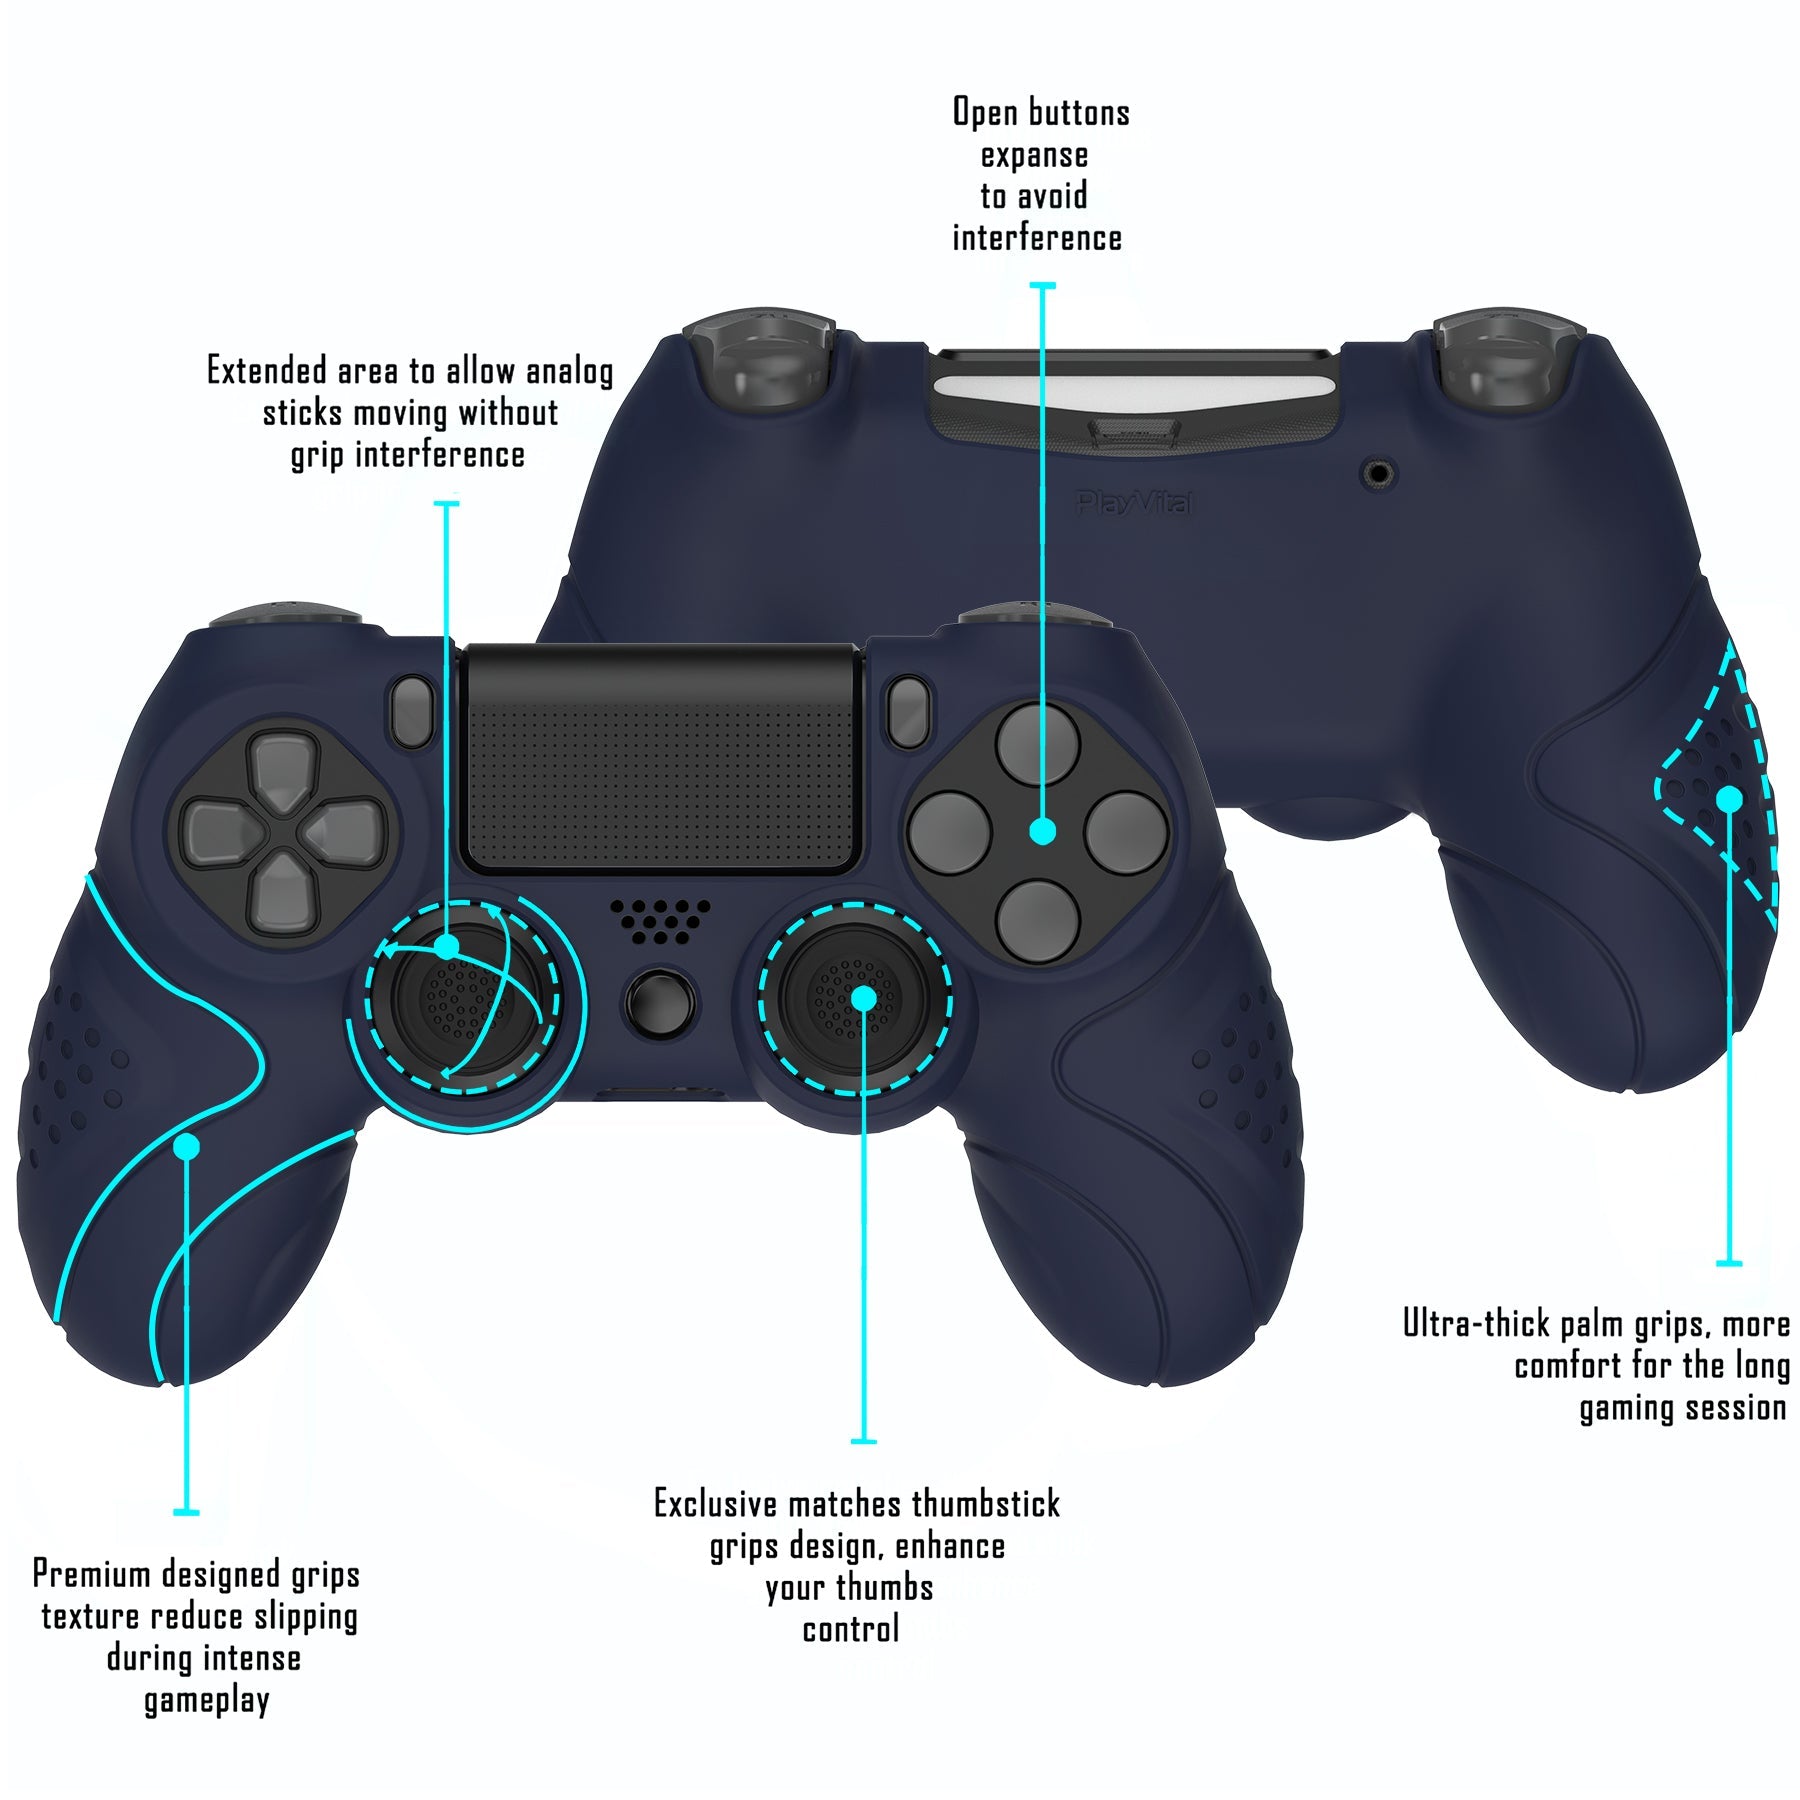 PlayVital Guardian Edition Silicone Cover Skin with Thumb Grip Caps for PS4  Slim Pro Controller - Midnight Blue - P4CC0061